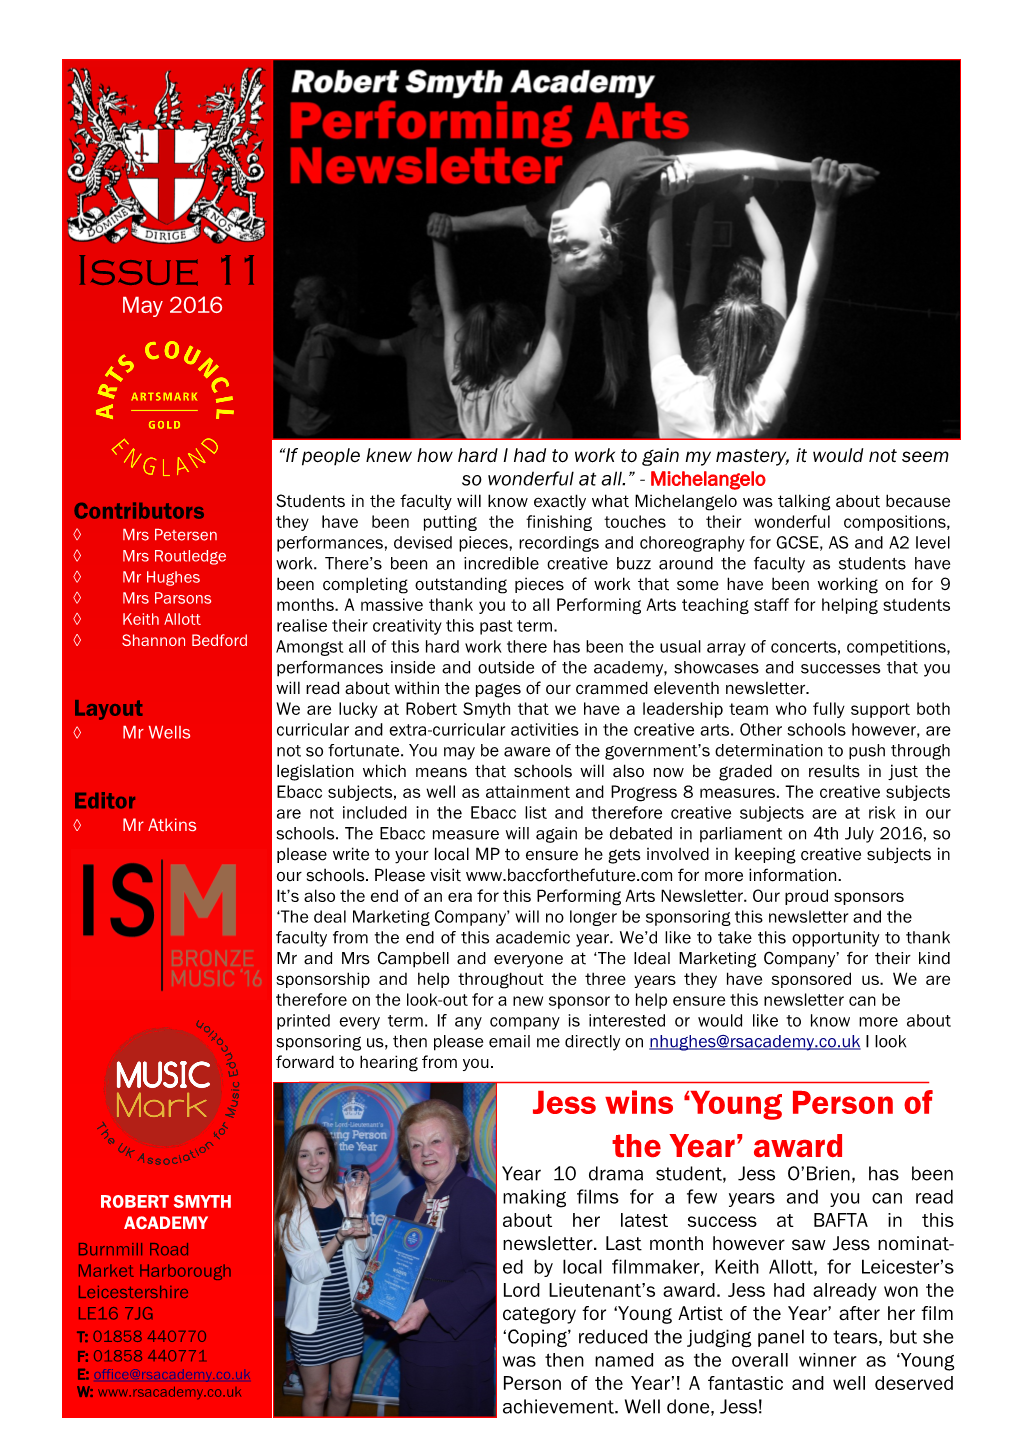 Issue 11 May 2016 Performing Arts Newsletter Date Newsletter ELEVENTH